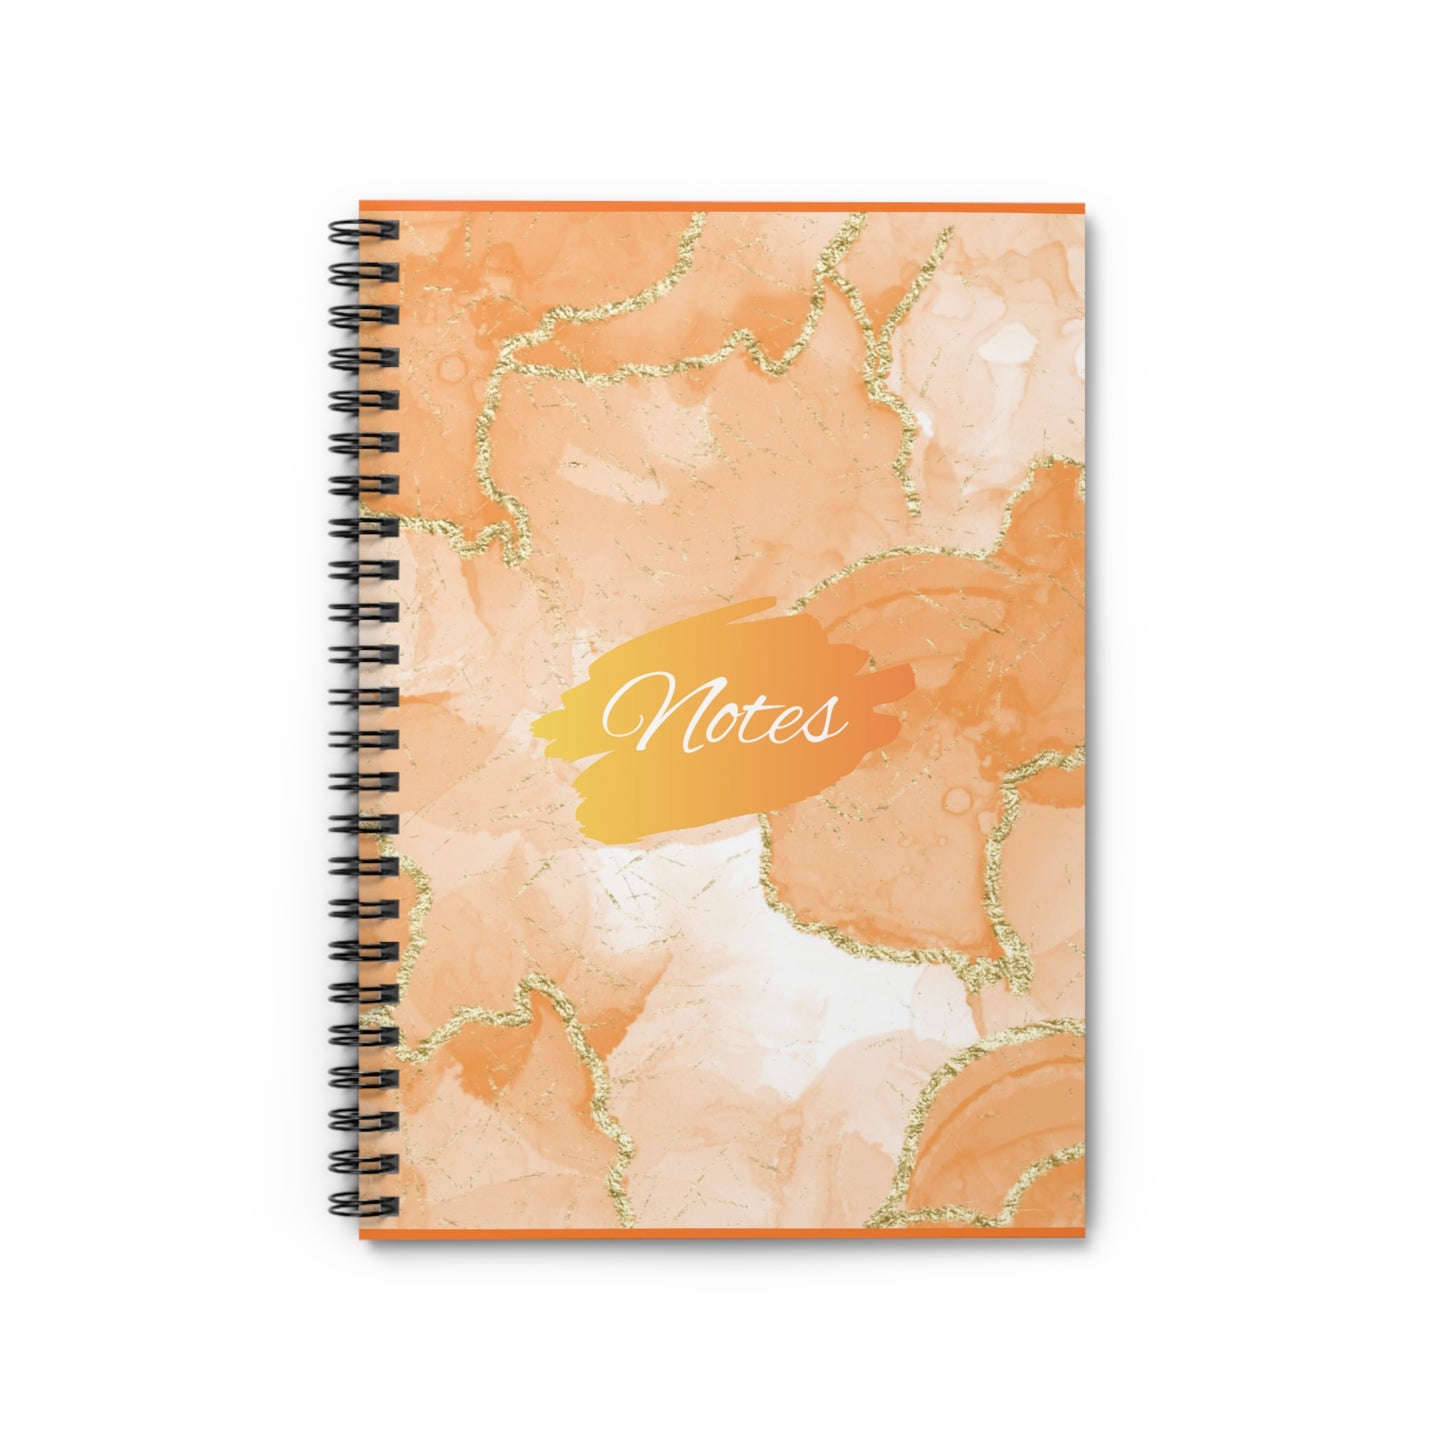 Orange Marble Spiral Notebook - College Ruled Lines 6"x 8"